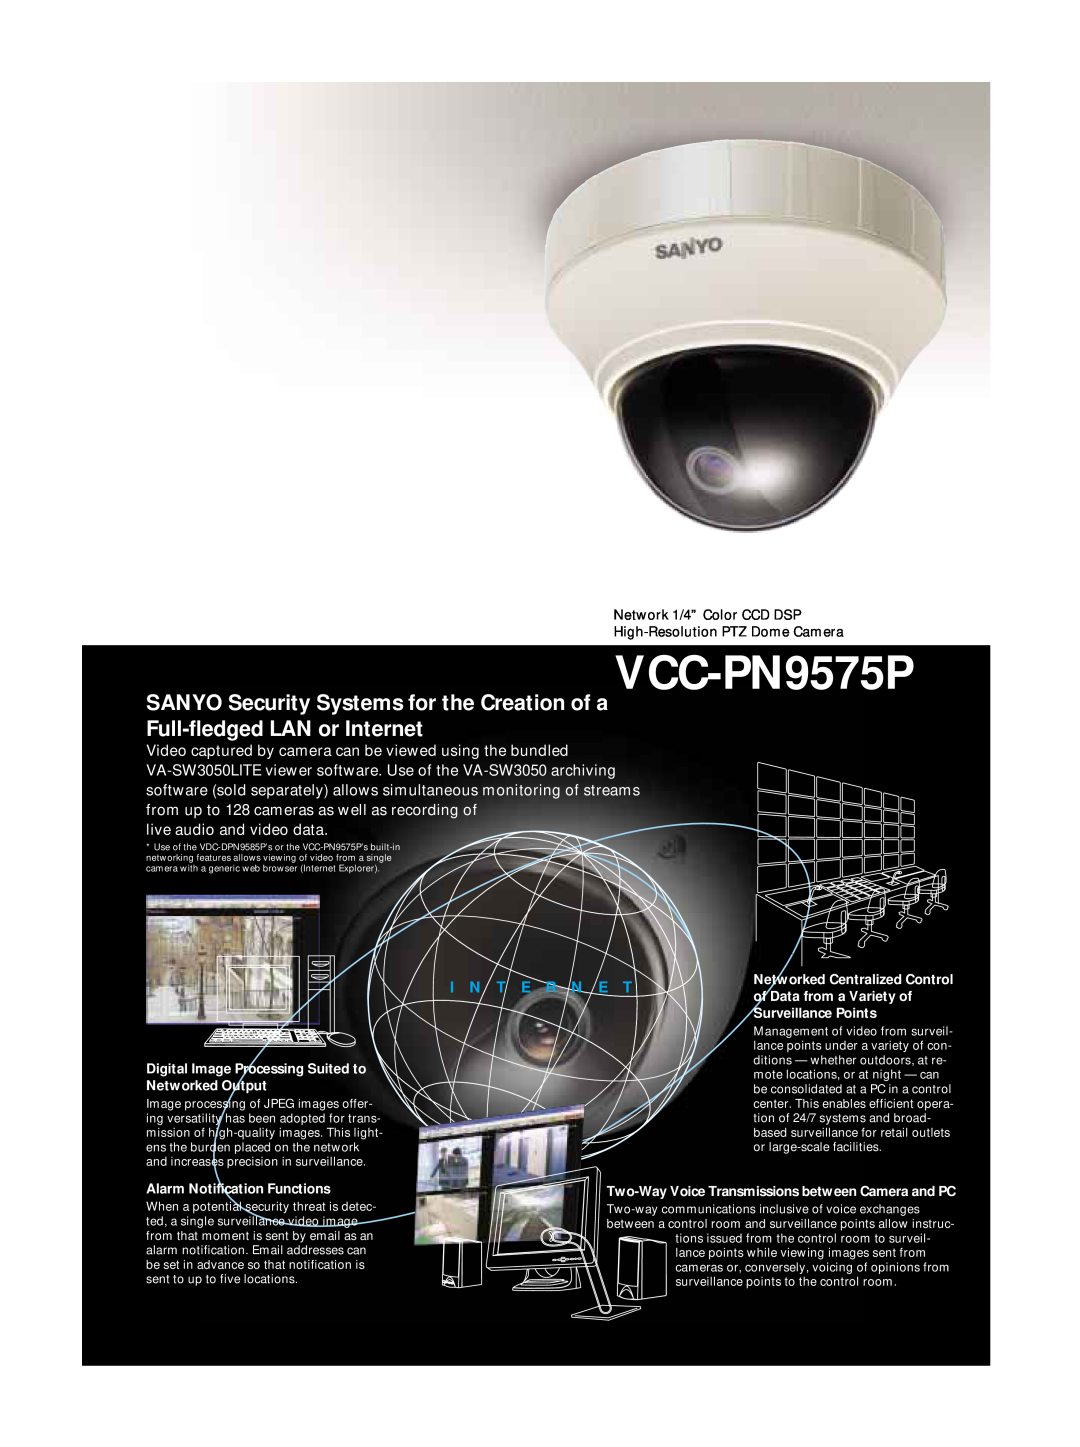 Sanyo VCC-PN9575P manual SANYO Security Systems for the Creation of a, Full-fledged LAN or Internet, I N T E R N E T 